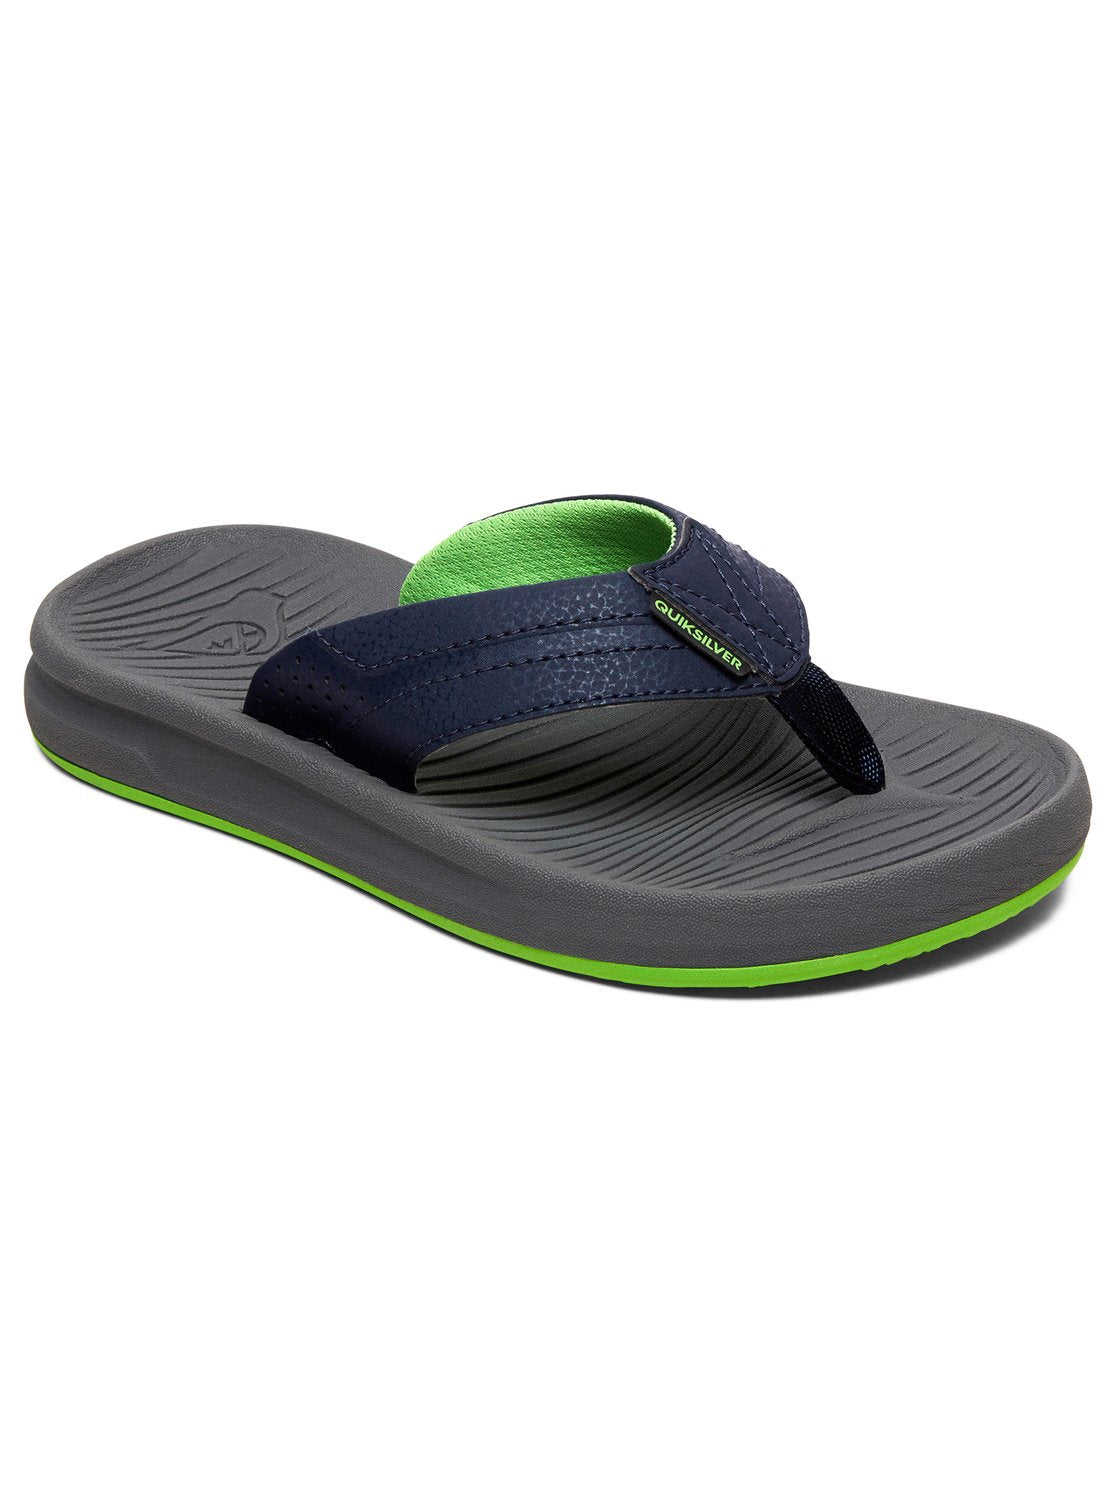 Quiksilver Oasis Youth Sandals